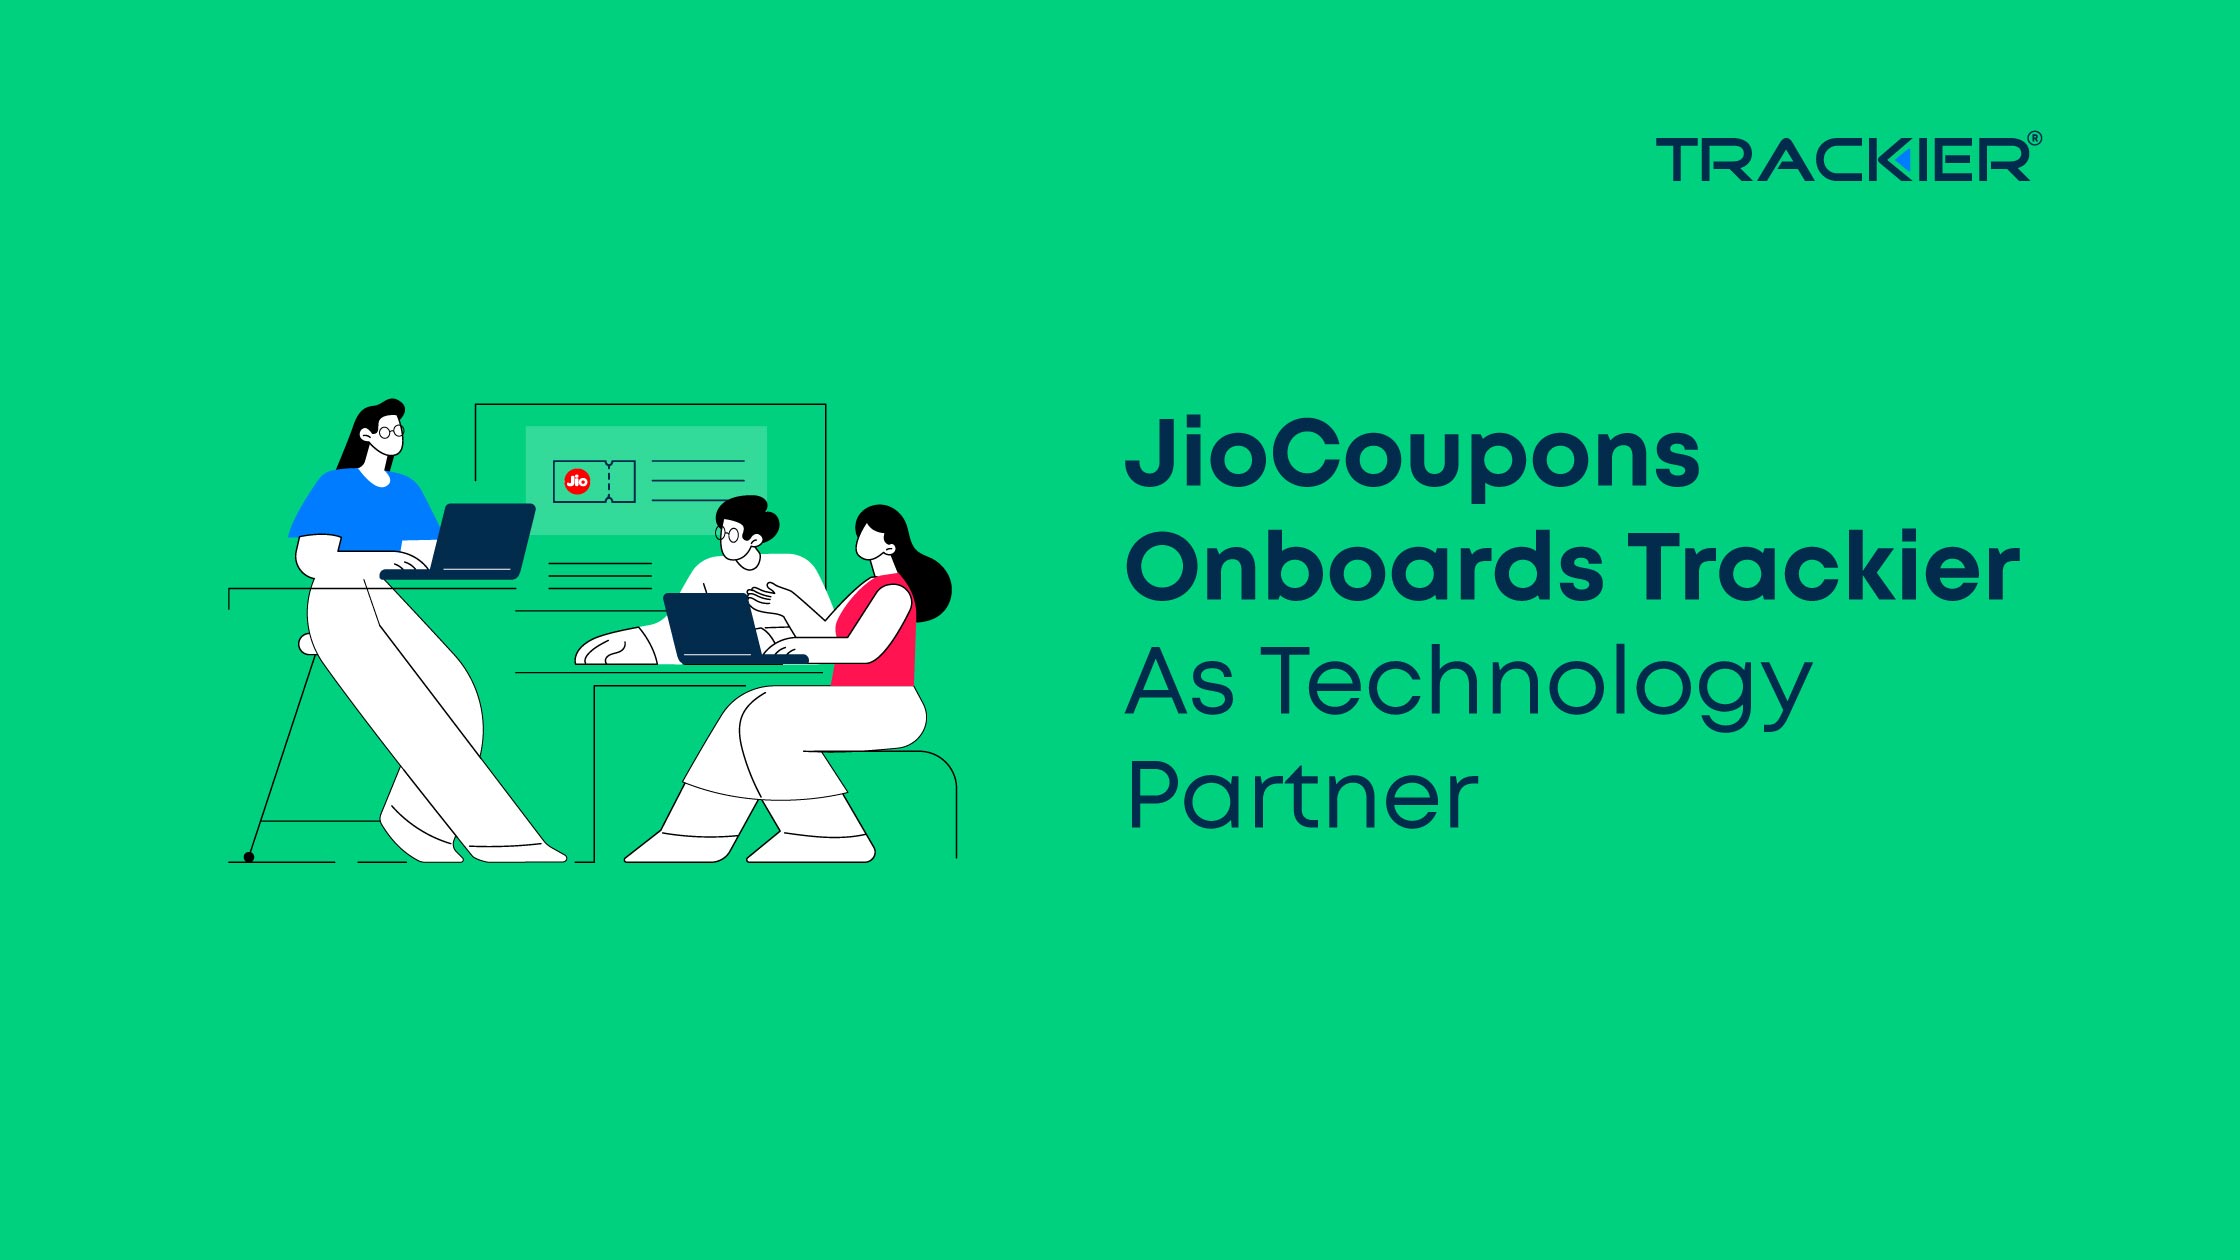 blog banner for jiocoupons and trackier partnership announcement.